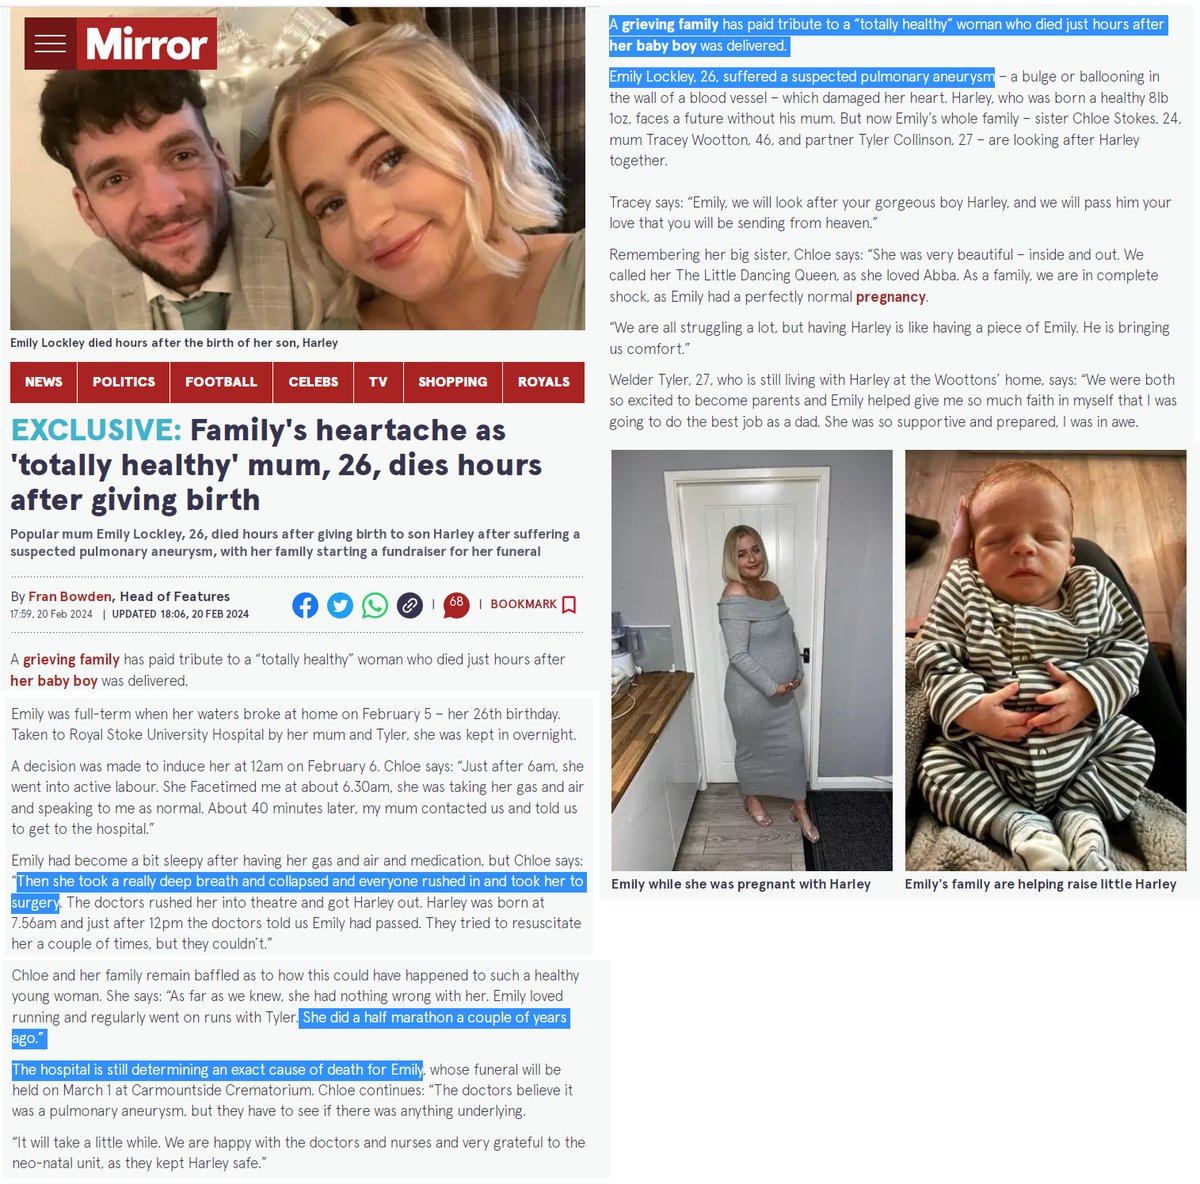 UK - 26 year old Emily Lockley @emily_lockley died suddenly hours after giving birth to her son, after suffering a suspected pulmonary aneurysm.

This is extremely rare. 

COVID-19 mRNA Vaccines damage blood vessels all over the body and cause aneurysms. That results in aneurysms